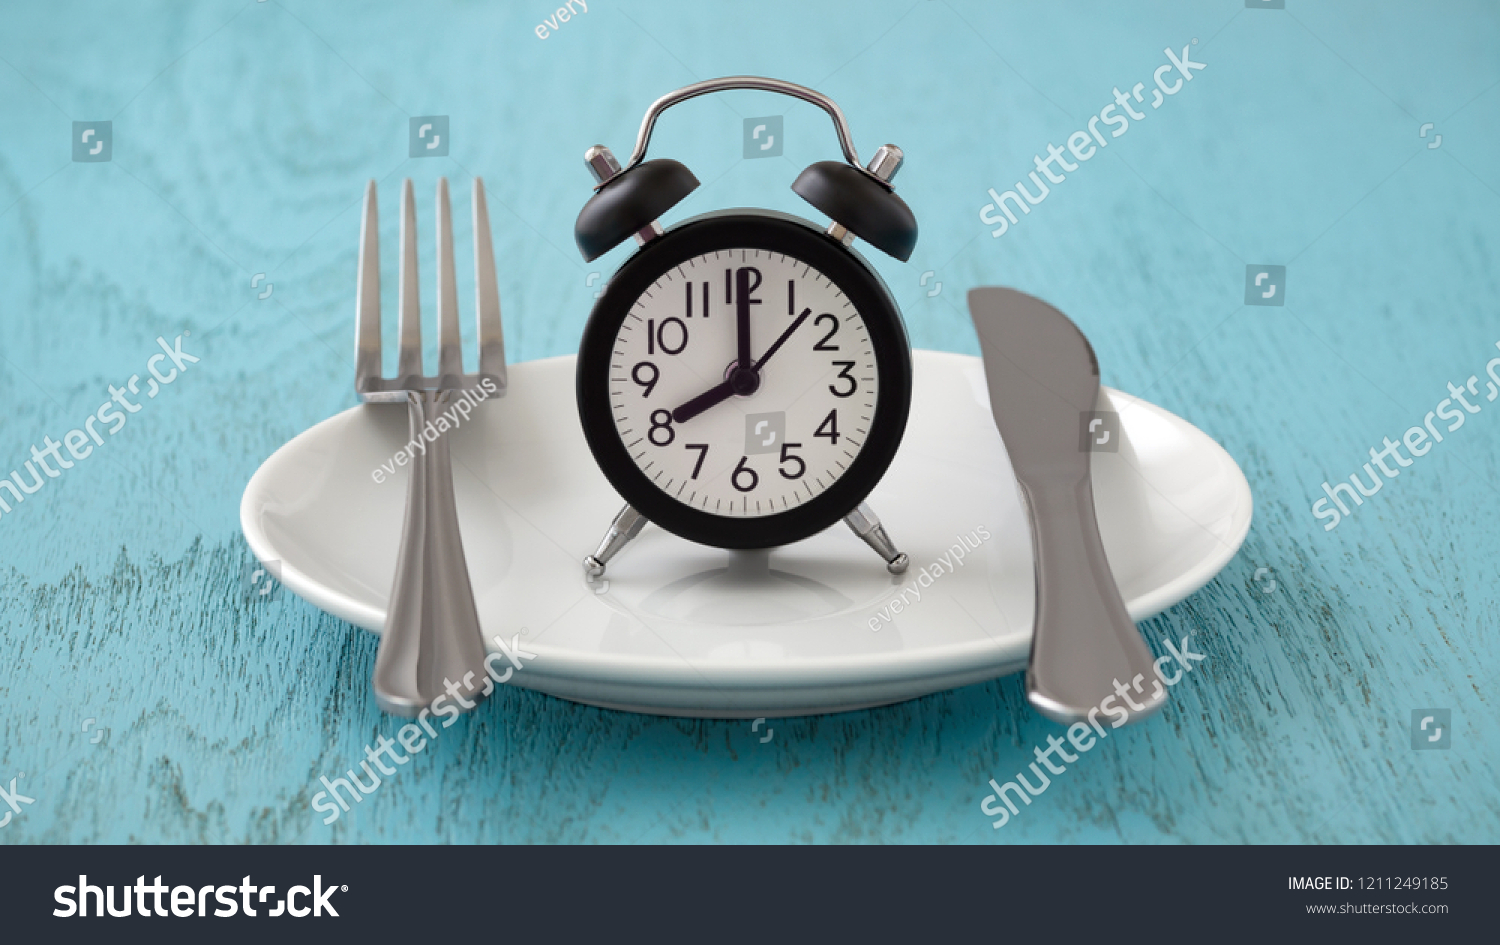 Clock on white plate with fork and knife, intermittent fasting, meal plan, weight loss concept on blue table #1211249185